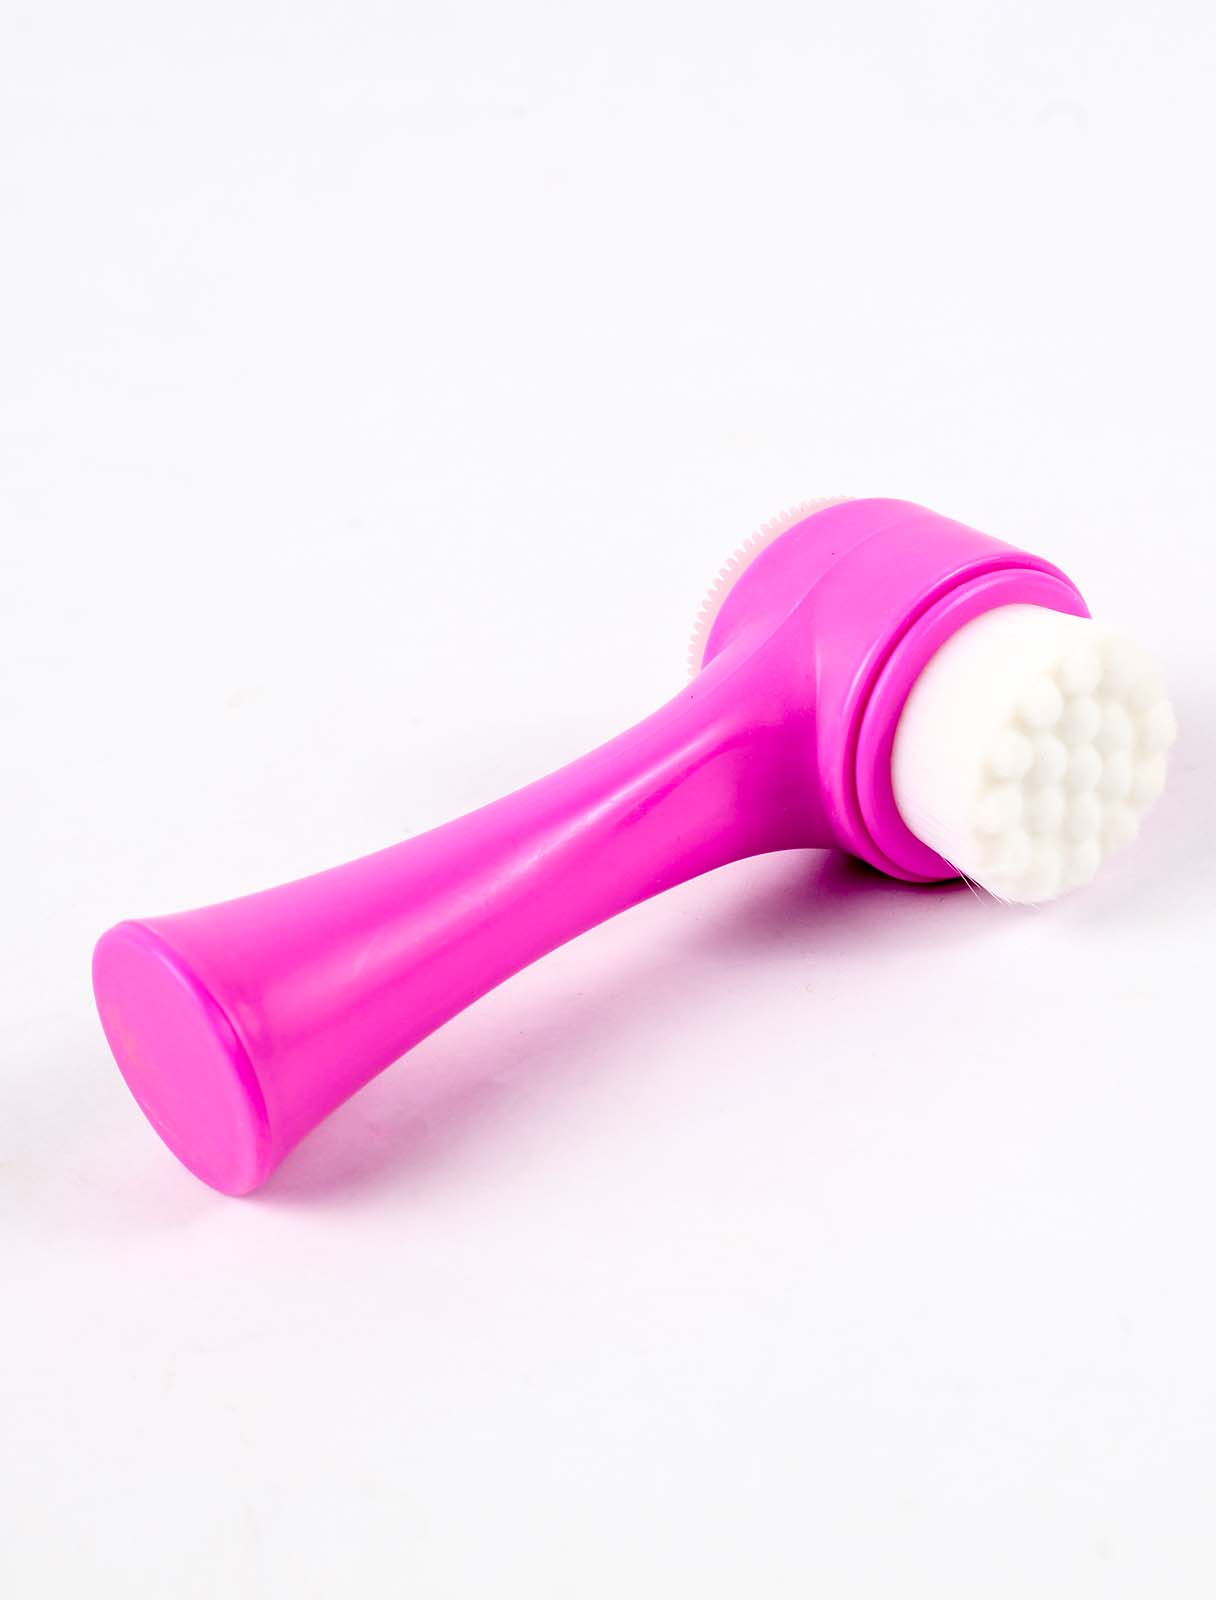 Hammer-shaped facial cleansing brush